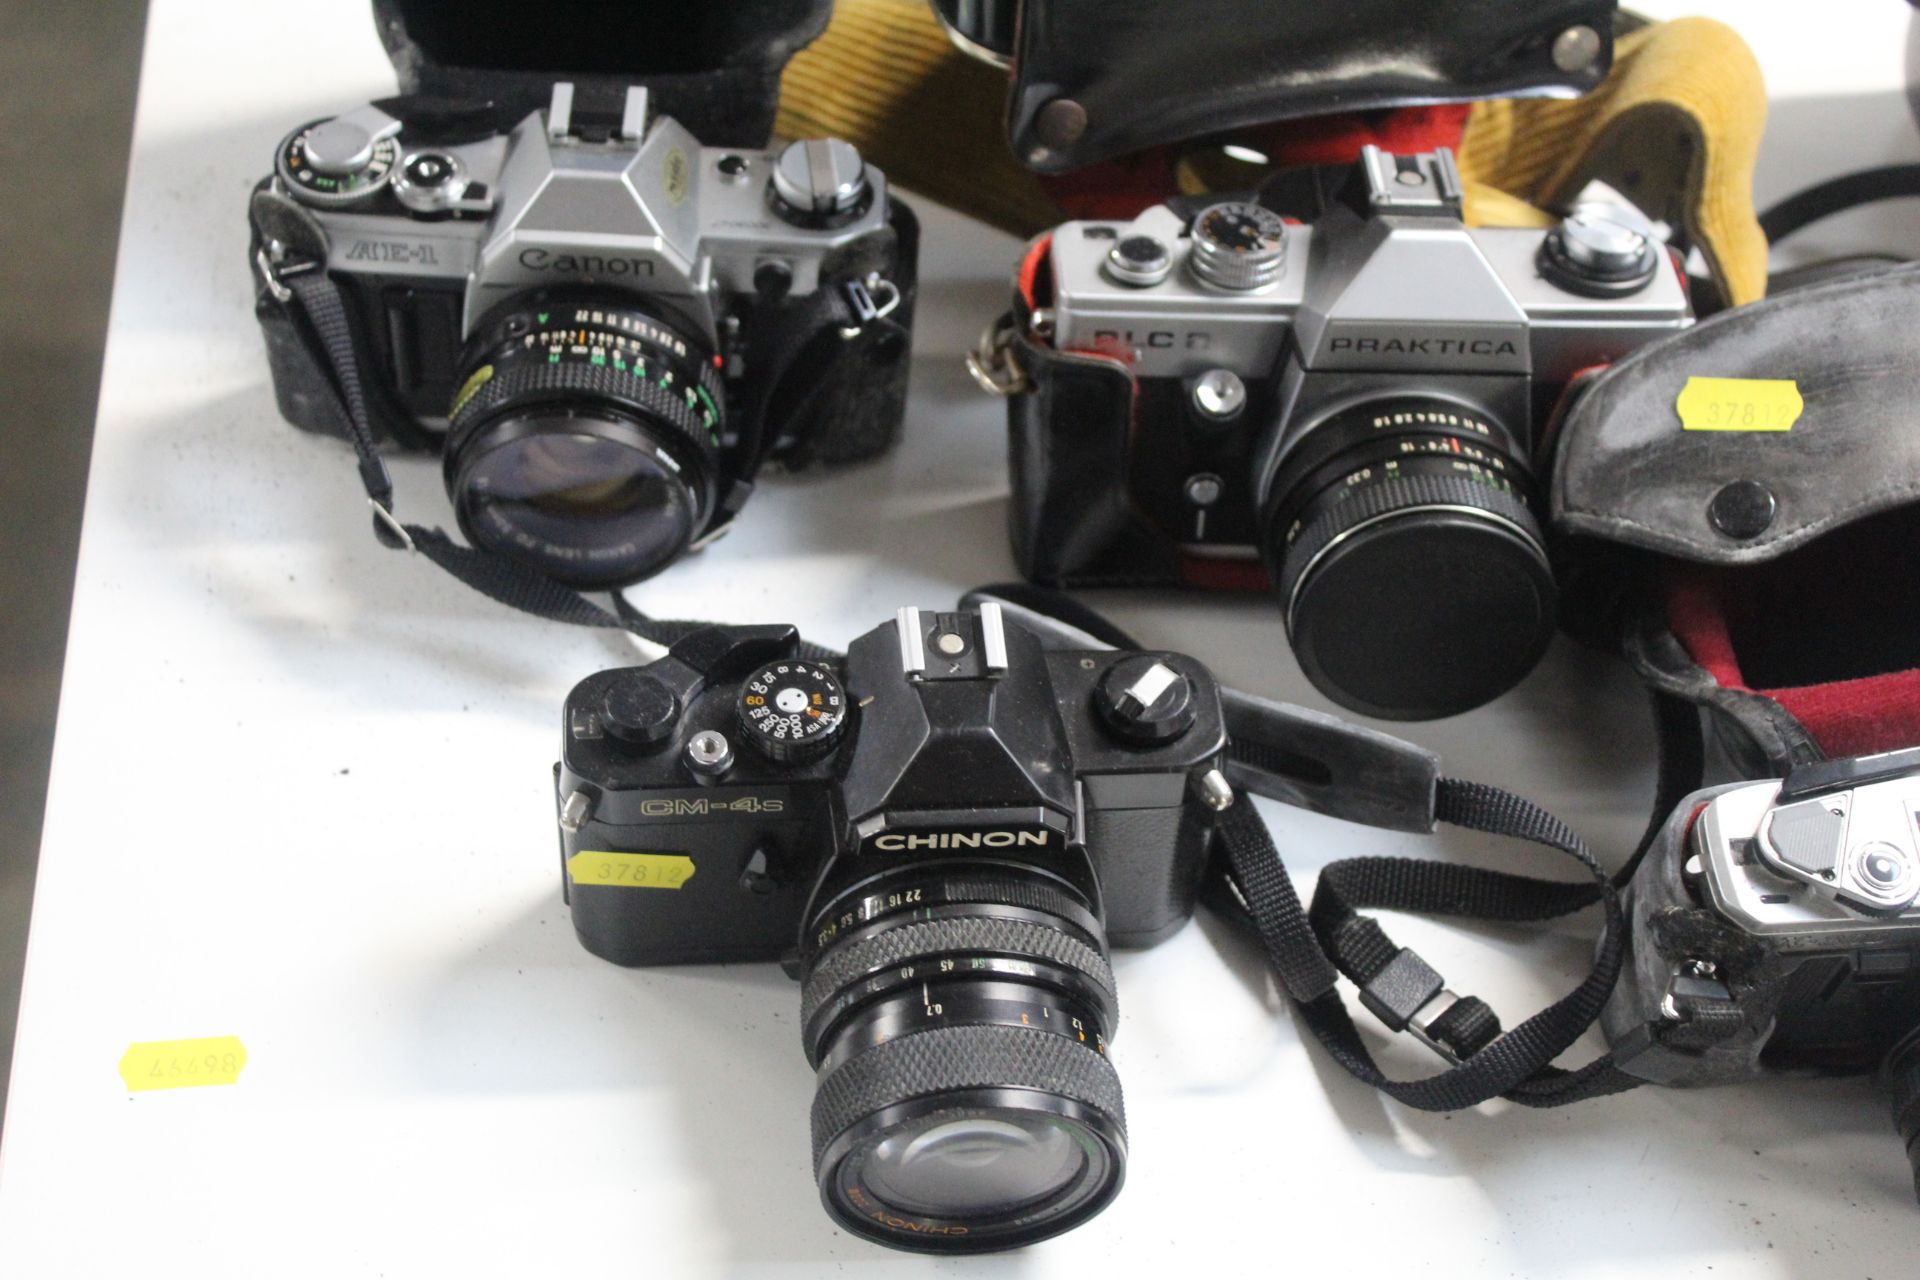 A quantity of cameras to include Canon, Yashica, Practika etc - Image 2 of 4